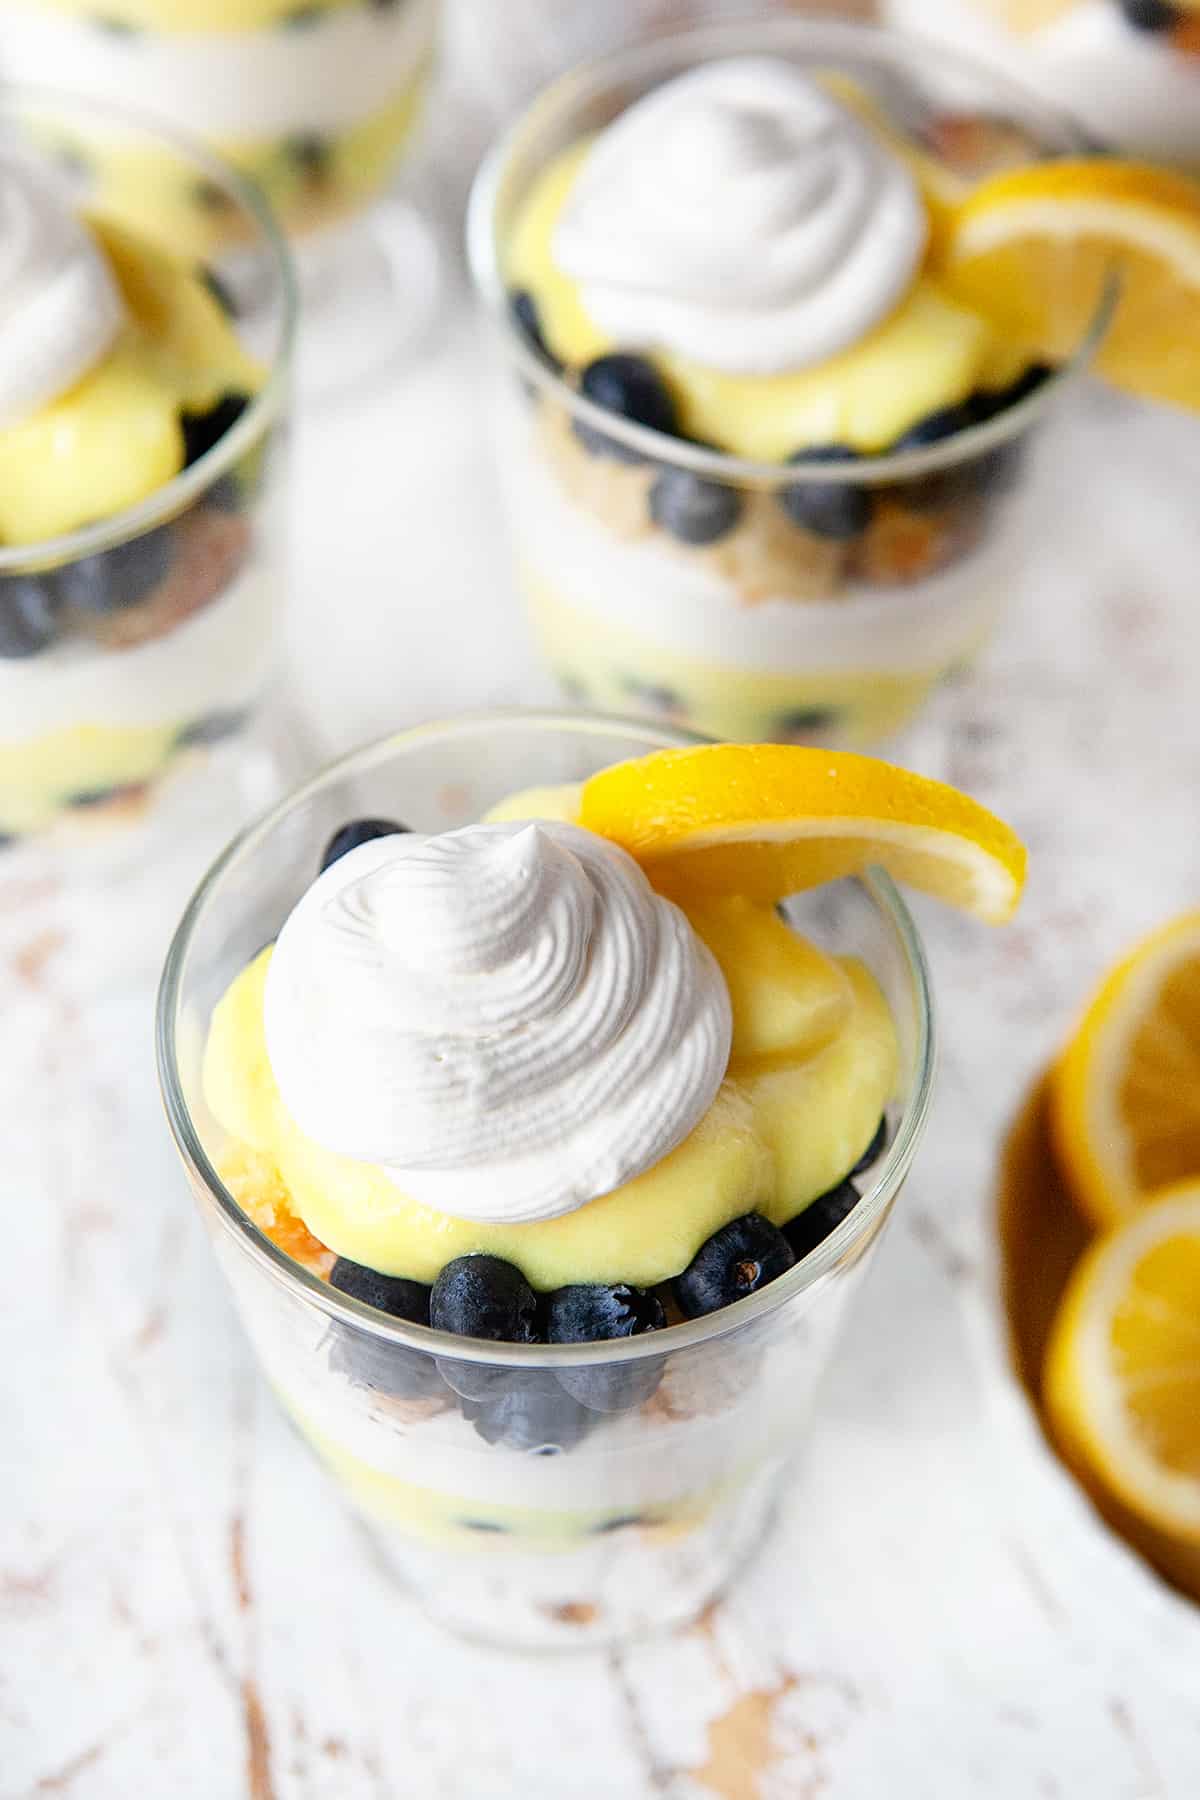 Lemon Blueberry Trifle in small trifle dish